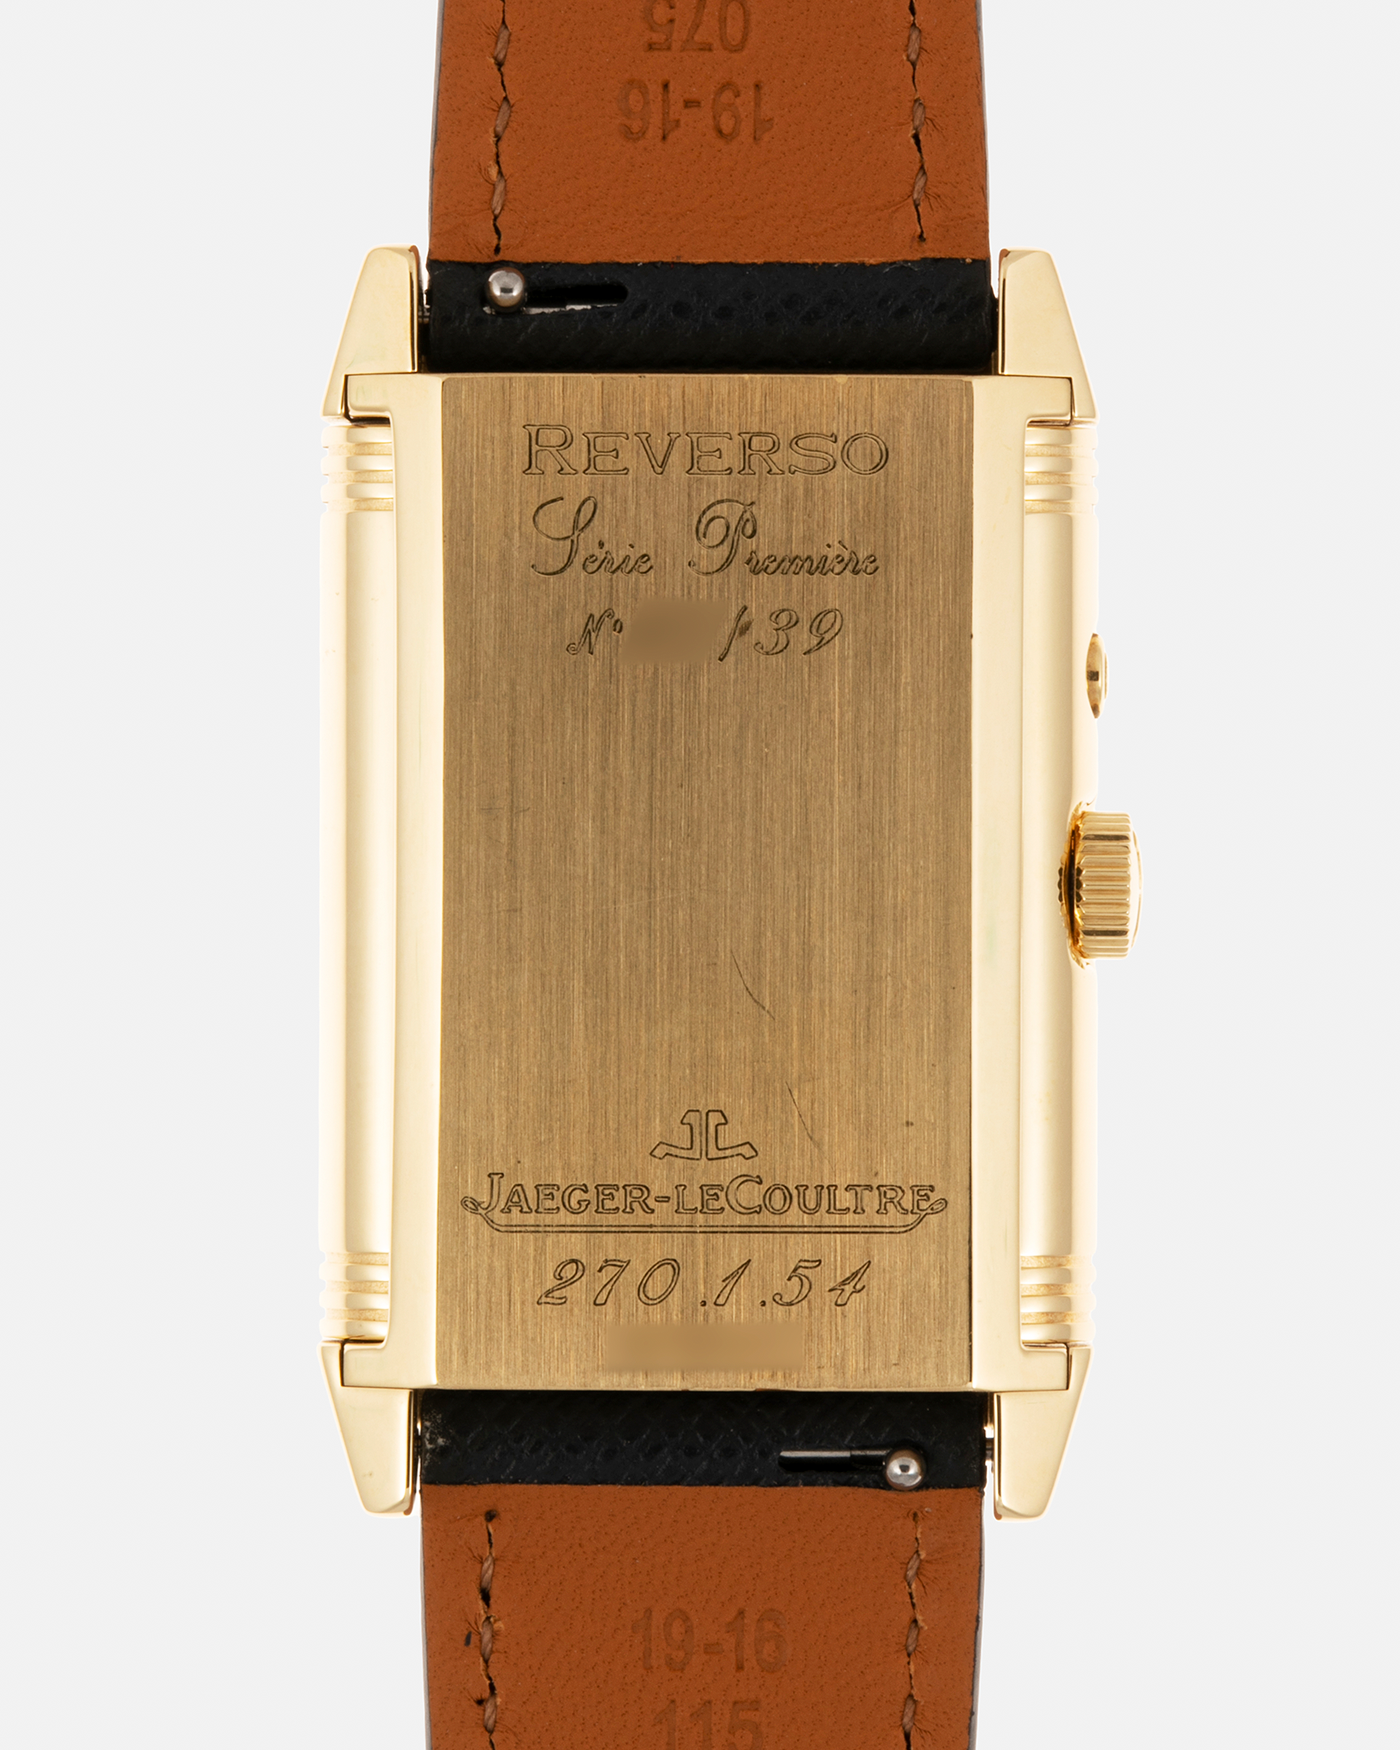 Brand: Jaeger LeCoultre Year: 2000s Model: Reverso Duoface Japan Edition Blue, Limited Edition of 39 Pieces Reference Number: 270.1.54 Case Material: 18-carat Yellow Gold Movement: Jaeger LeCoultre Cal. 854, Manual-Wind Case Diameter: 42mm x 26mm Lug Width: 19mm Strap: Molequin Navy Blue Textured Calf Leather Strap with Signed 1-carat Yellow Gold Deployant Clasp, with additional Jaeger LeCoultre Black Alligator Leather Strap (Used)